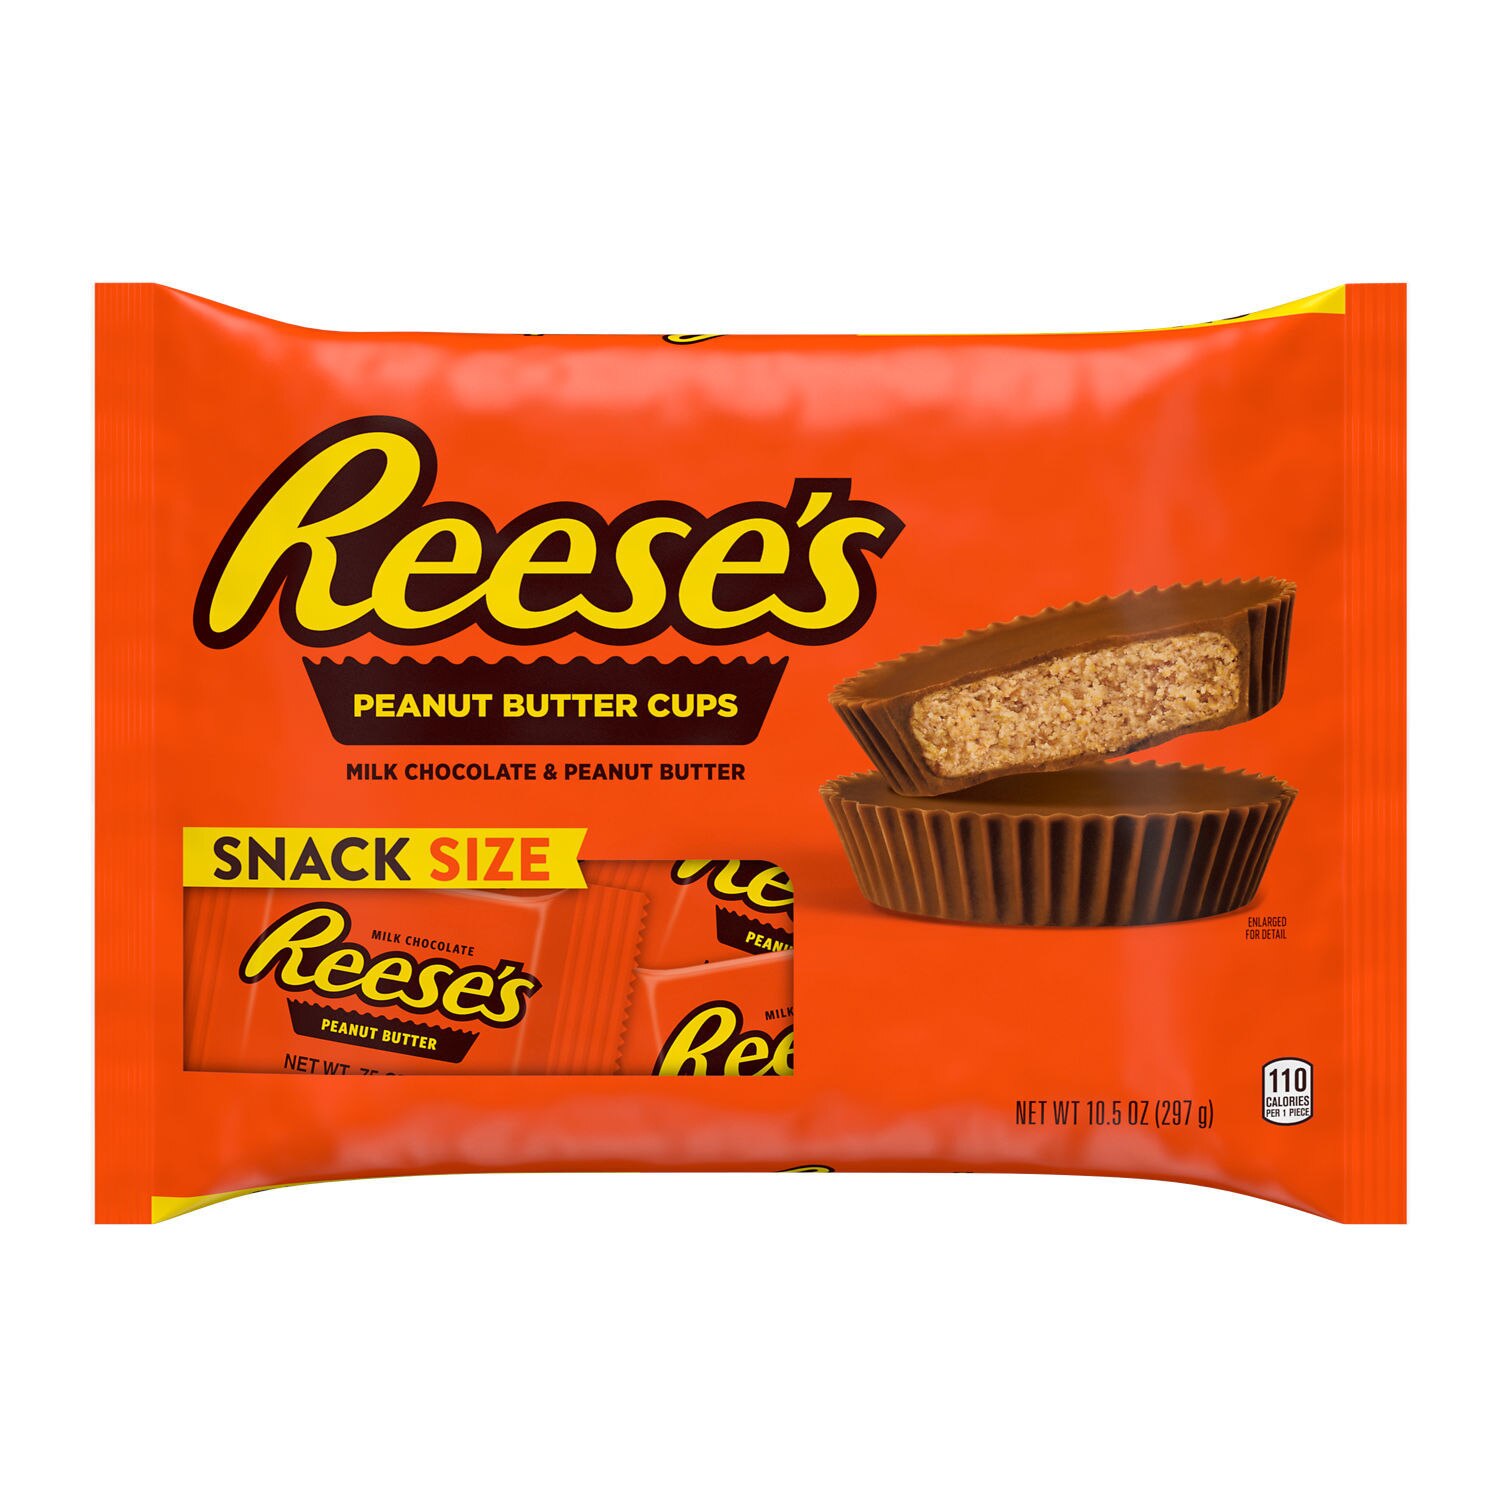 Reese's Milk Chocolate Peanut Butter Snack Size Cups Candy, 10.5 oz